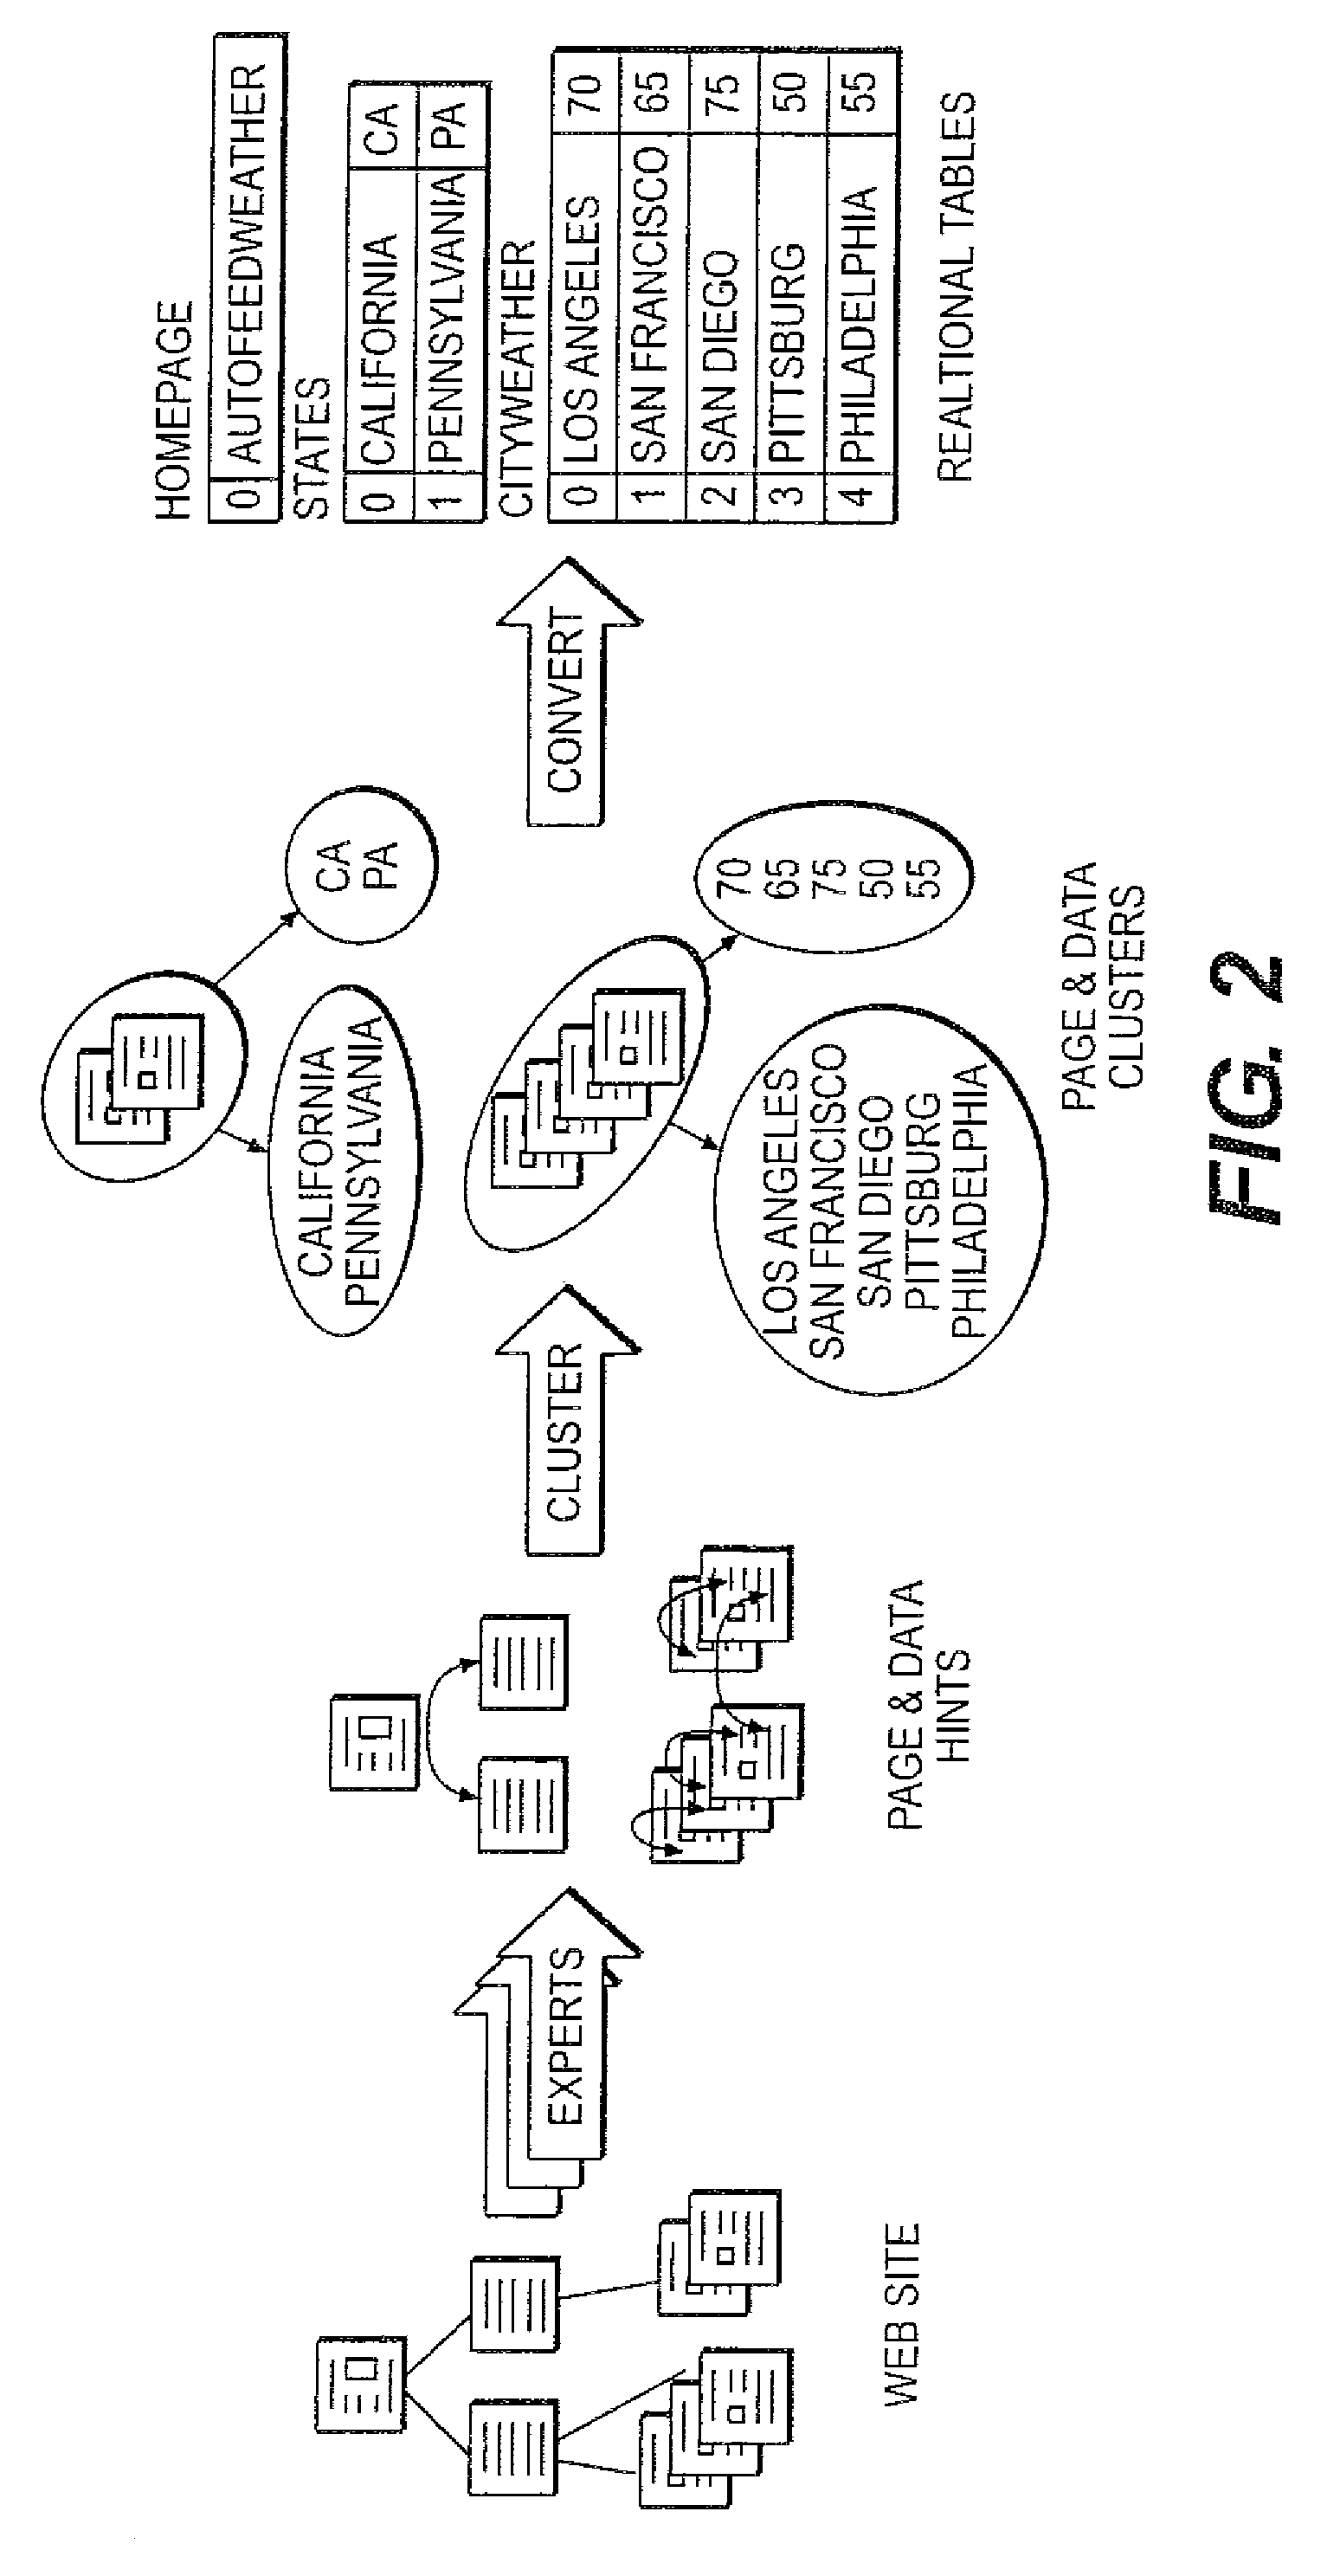 Method and system for automatically extracting data from web sites